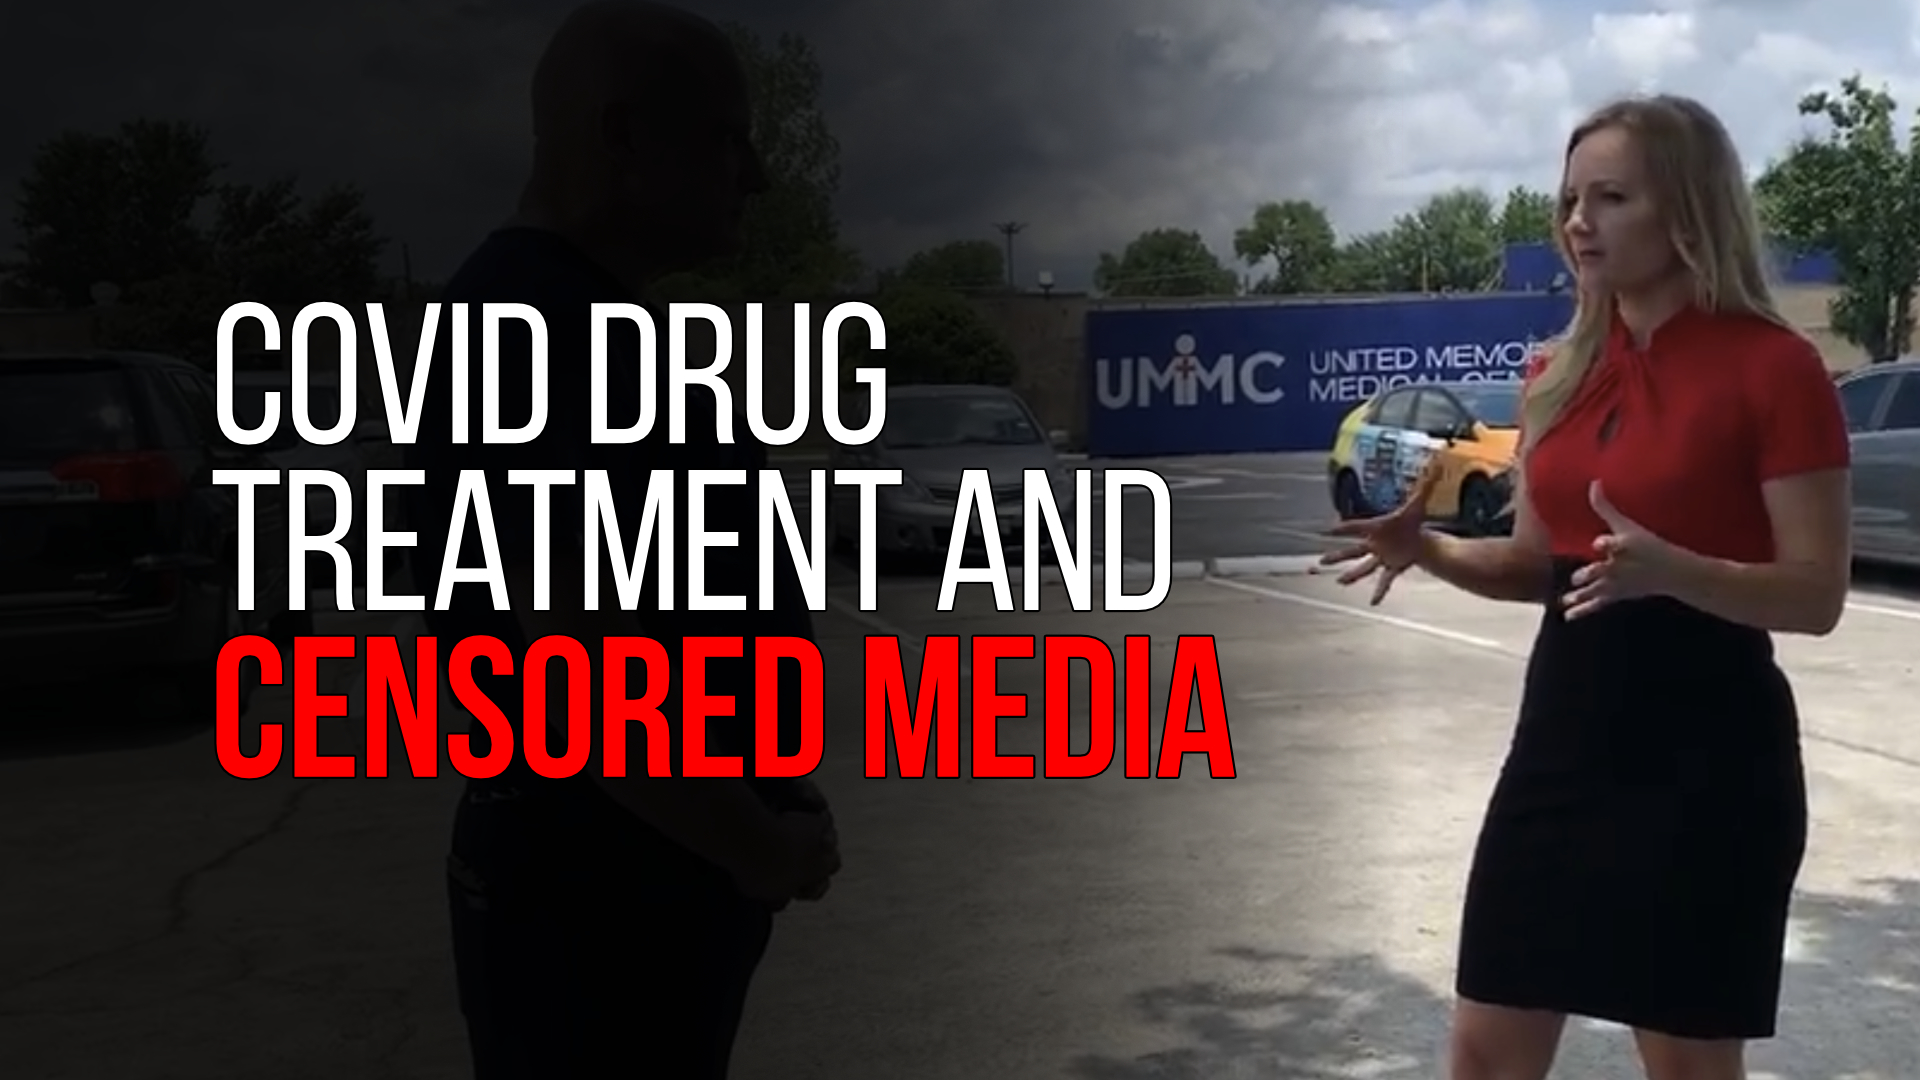 Pursuing Truth in Covid Drug Treatment Amid a Censored Media Landscape